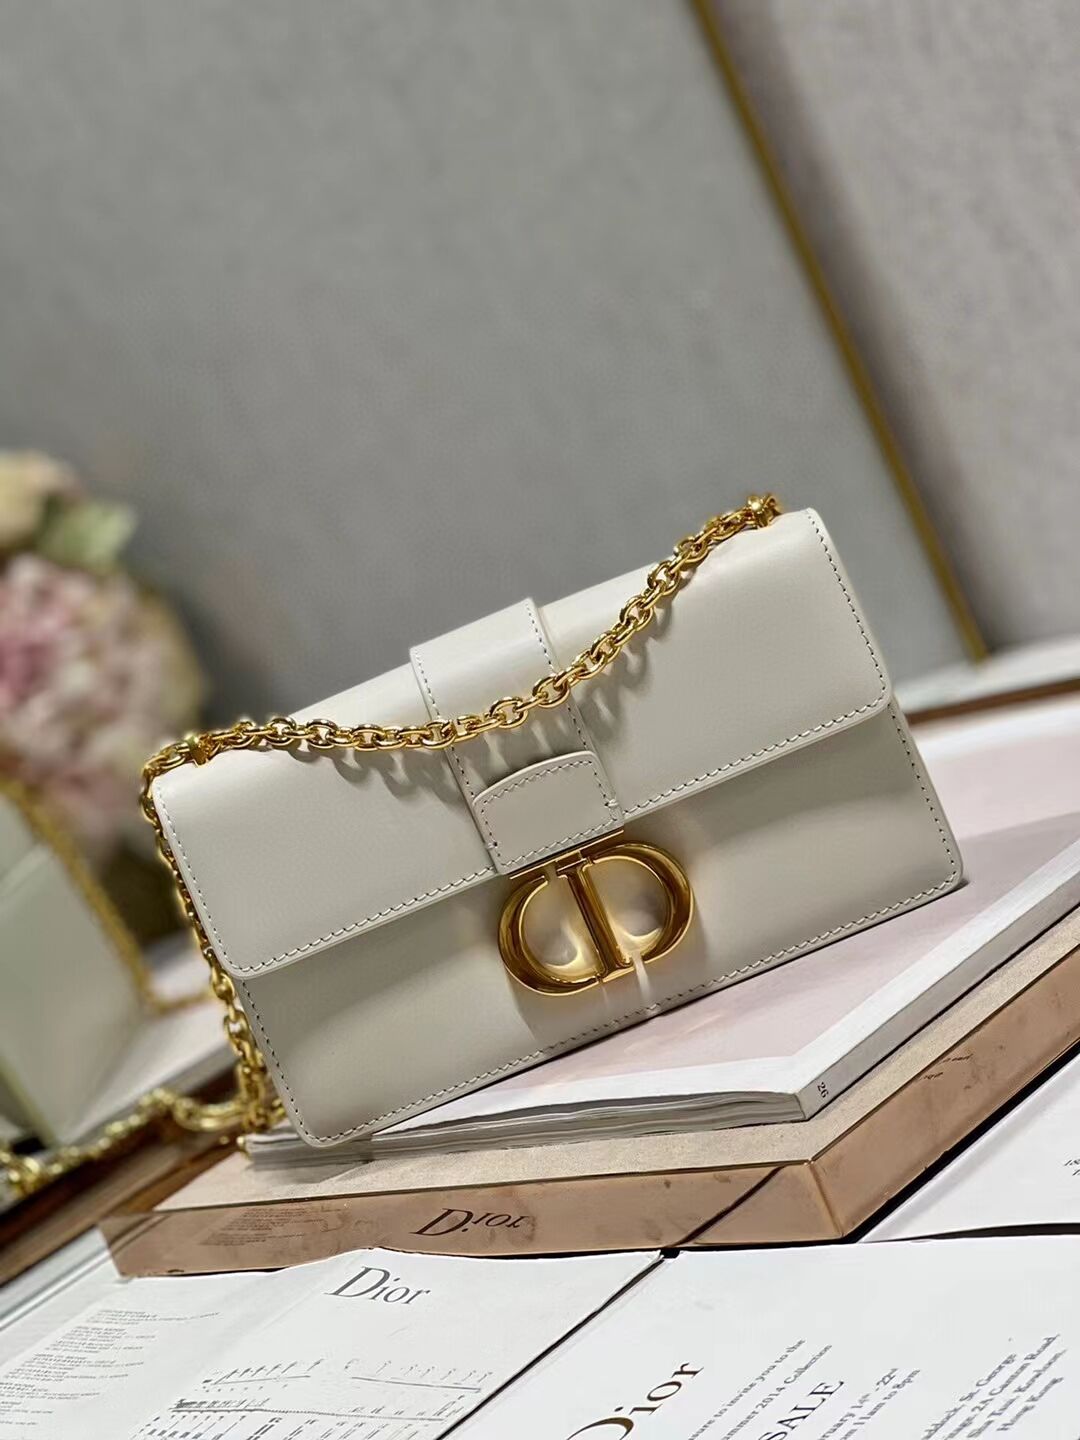 DIOR 30 MONTAIGNE EAST-WEST BAG WITH CHAIN Calfskin M9334 Latte